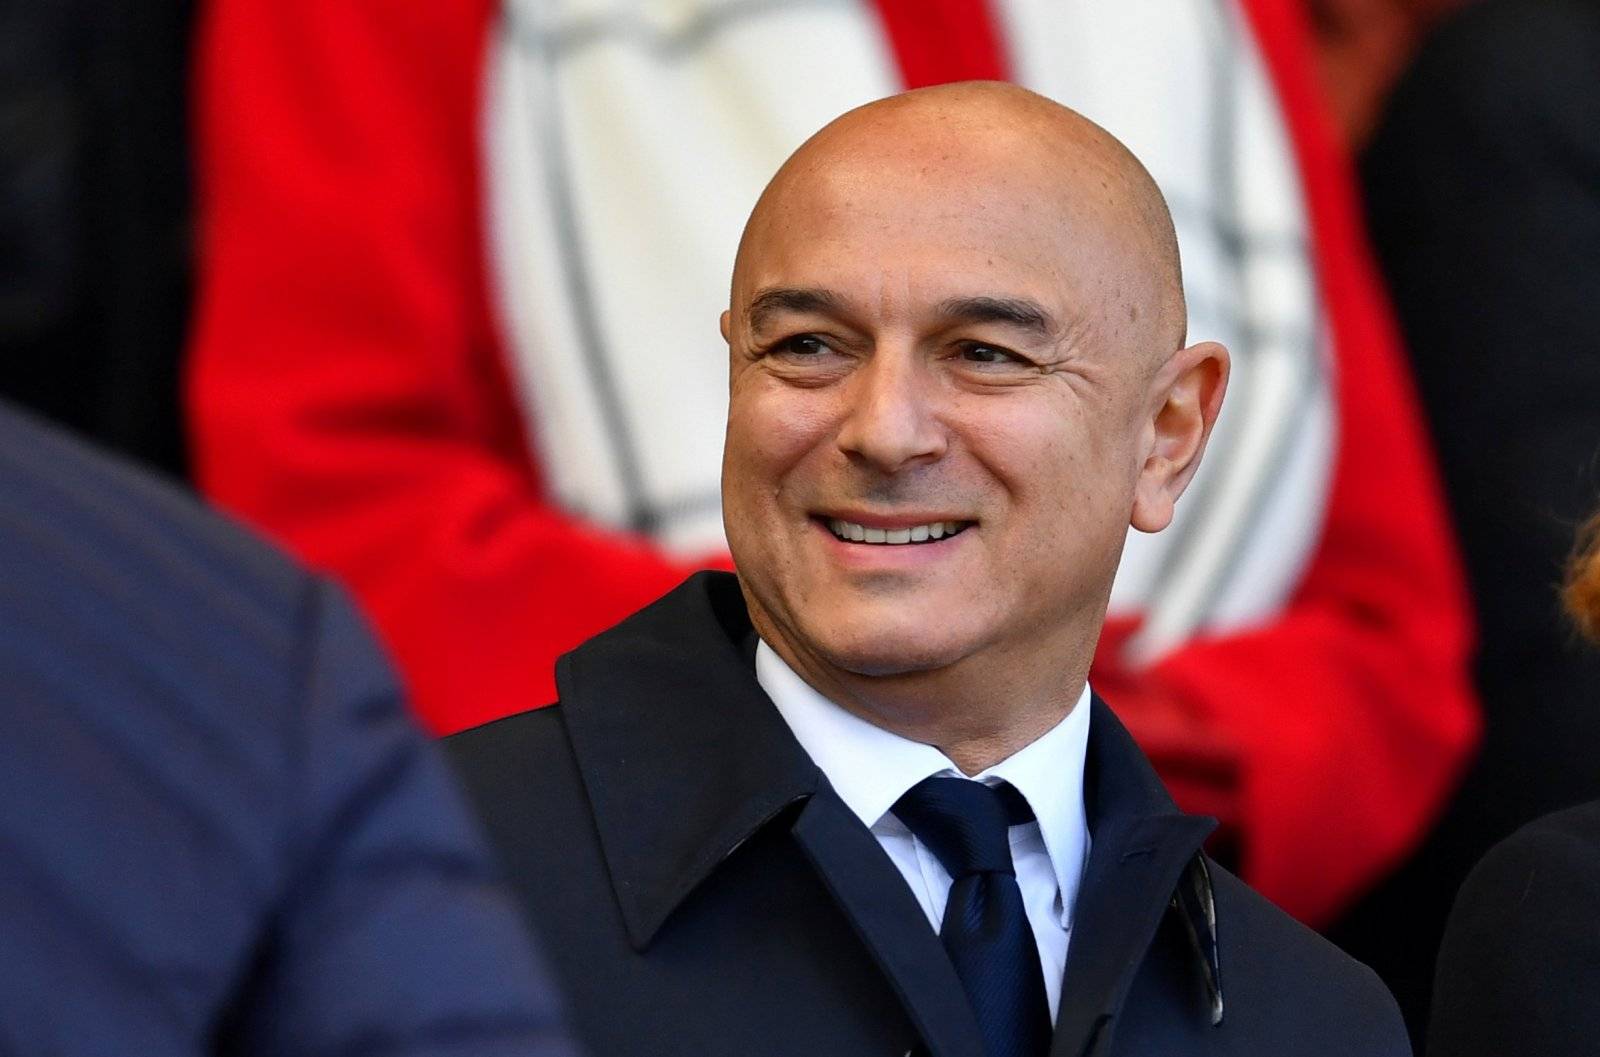 Tottenham: David Ornstein plays down hope of imminent takeover developments - Podcasts